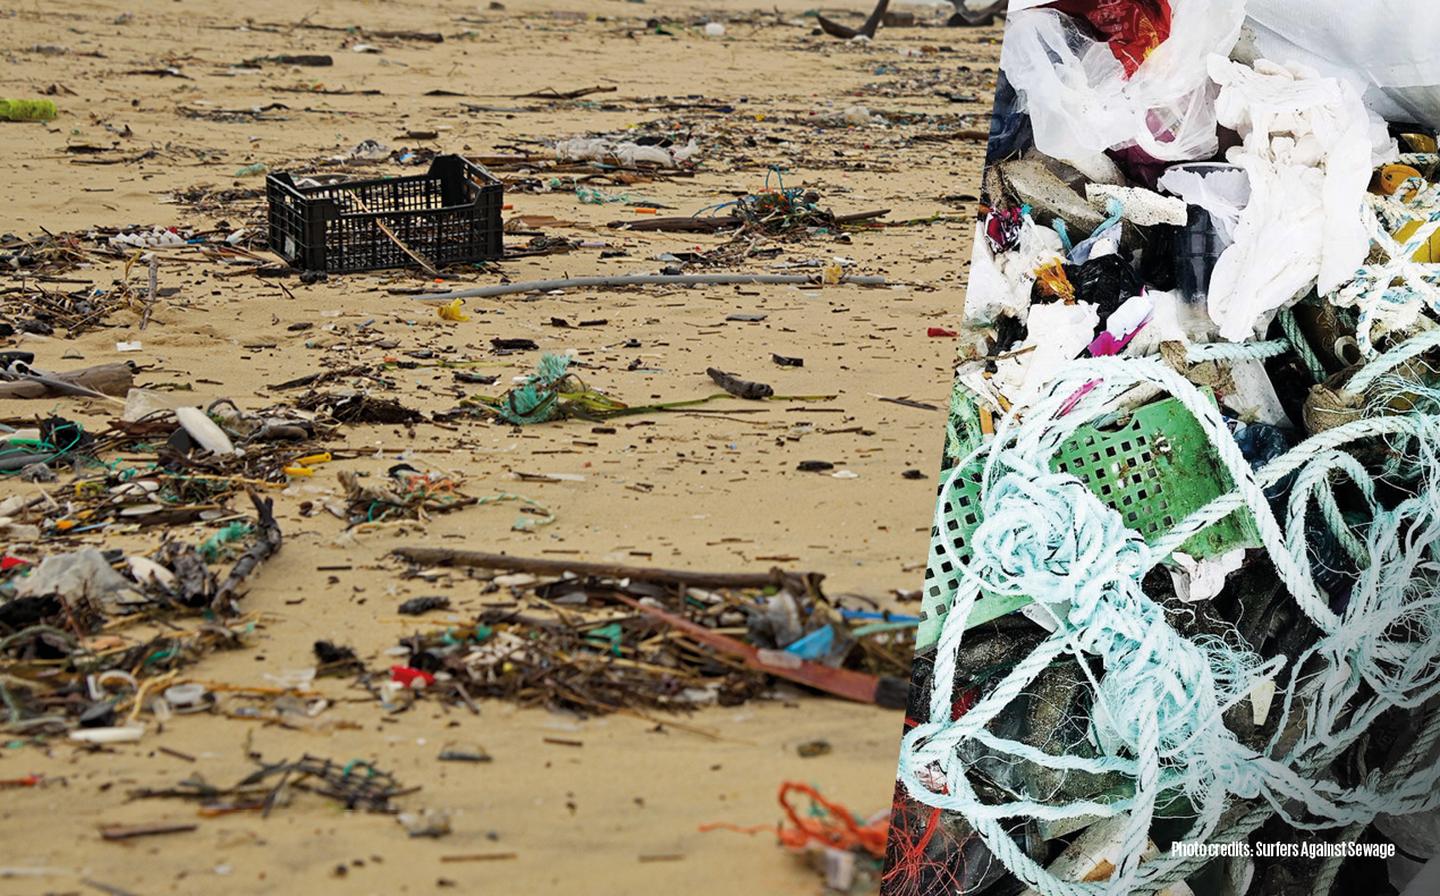 More plastic and discarded nets on our UK beachers. A huge litter problem